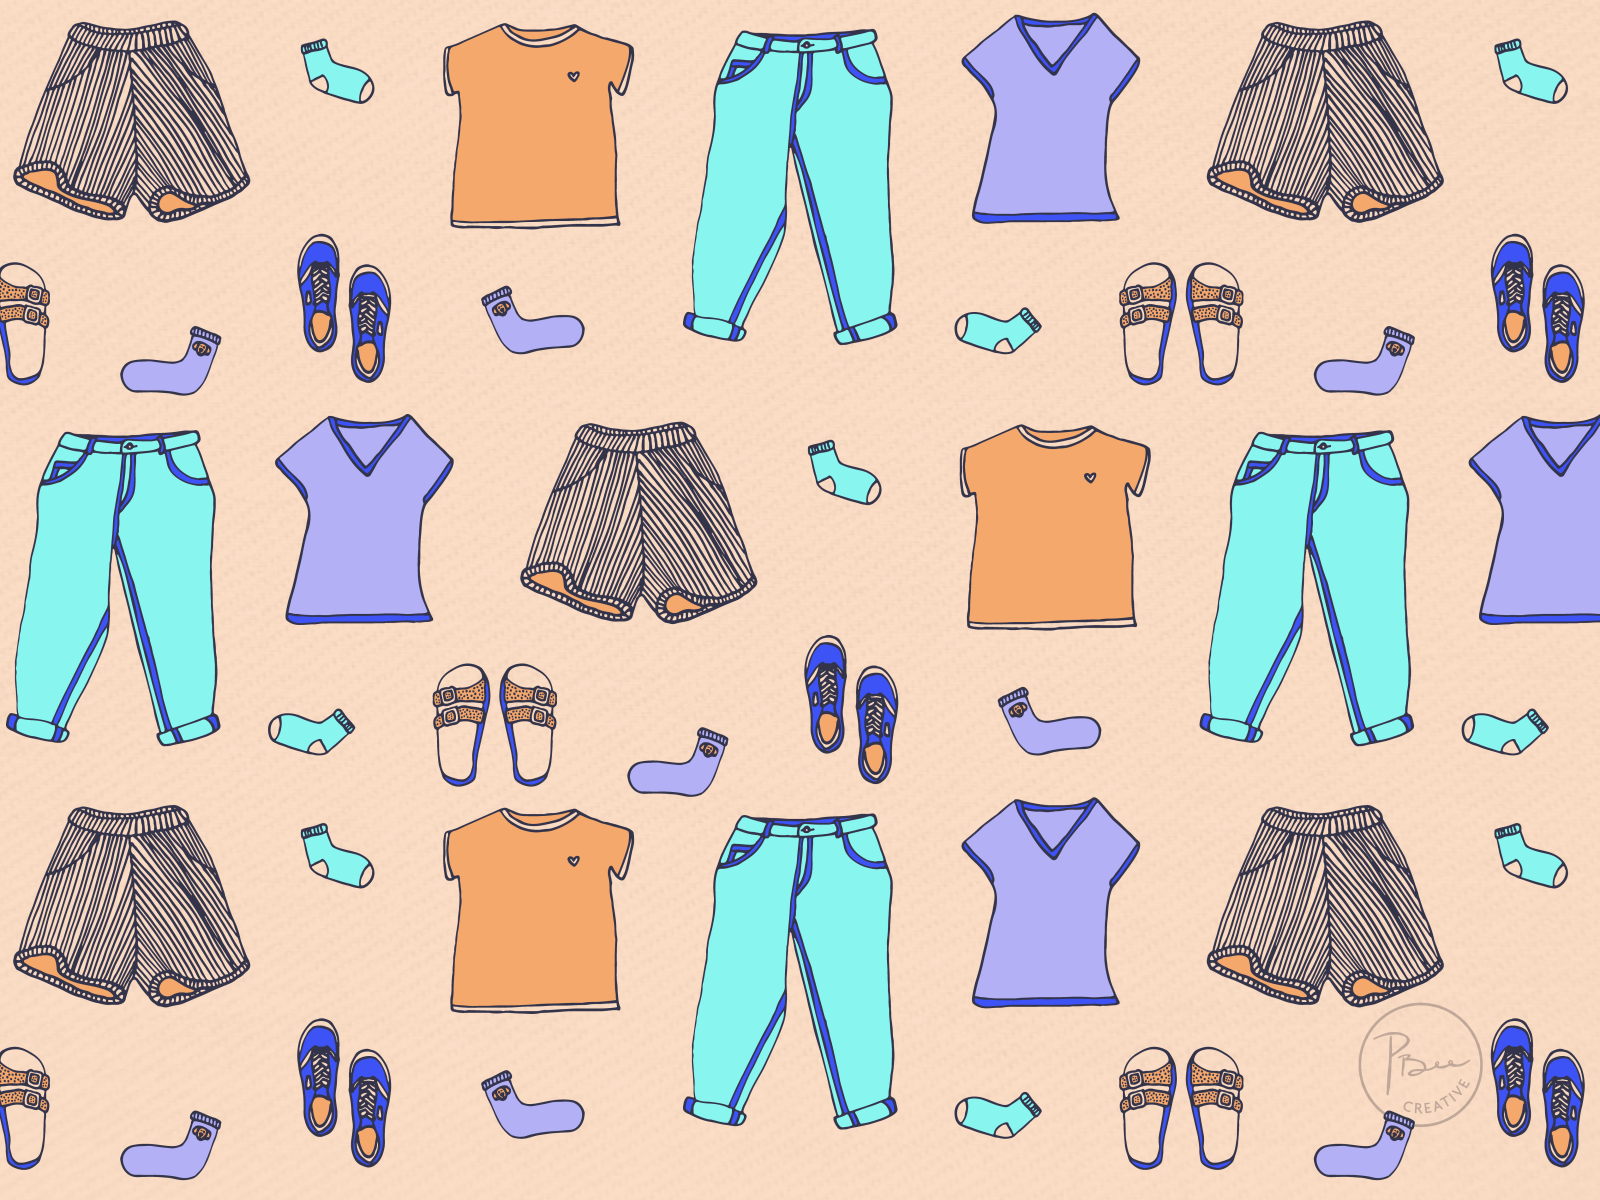 Summer Clothing Pattern by Patricia Burleigh on Dribbble